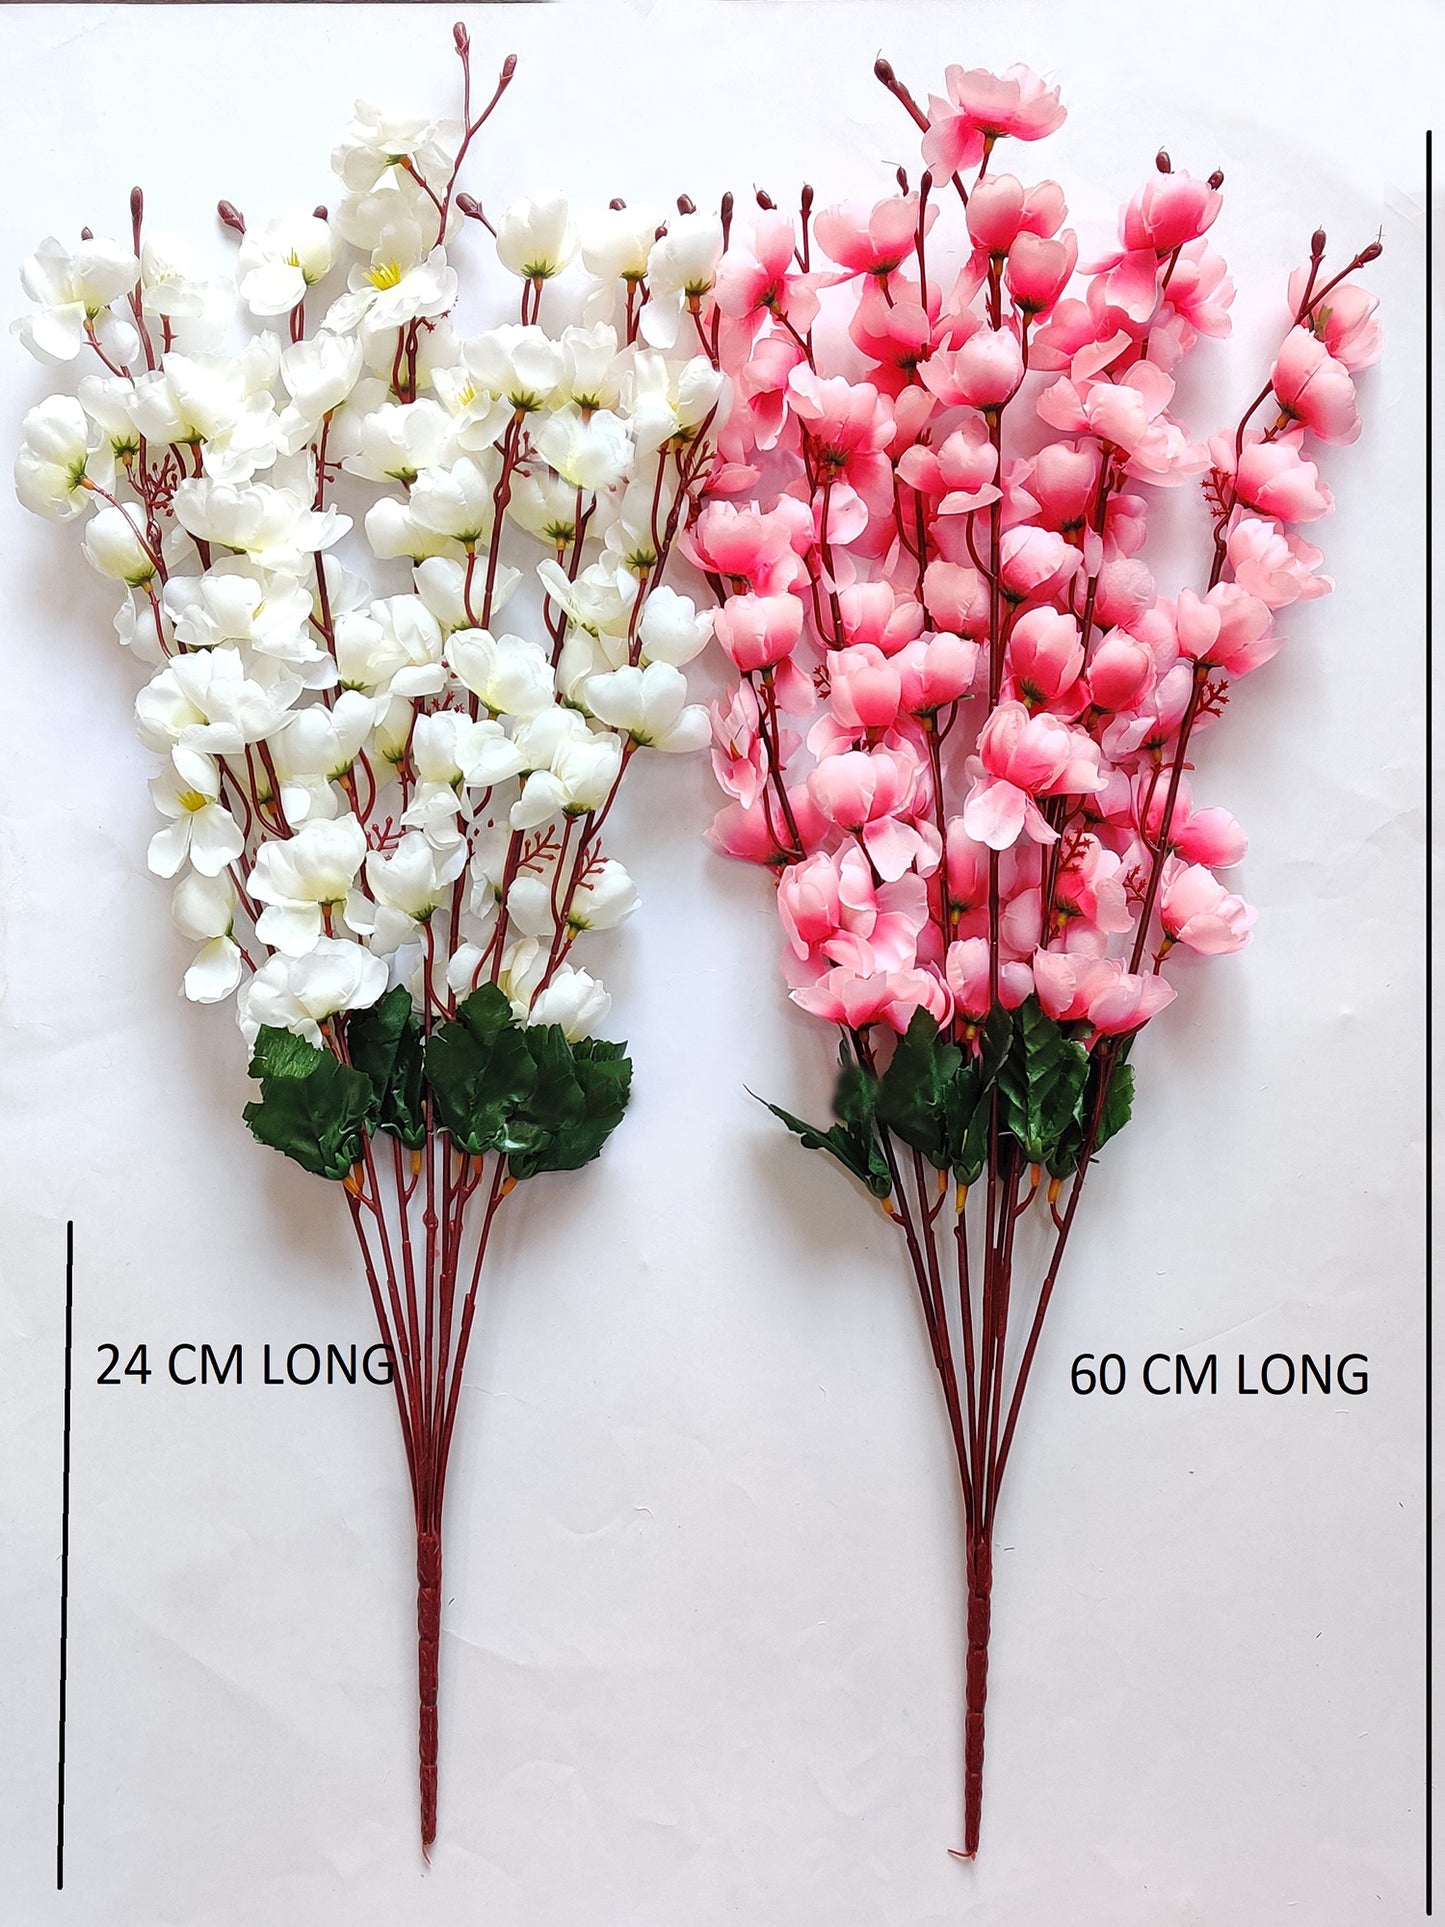 ARTSY® Artificial Flowers For Home Decoration Cherry Blossom Flower Bunch For Vase , Office Decor, Without VASE, Combo (White light pink , Pack of 2 Pieces)